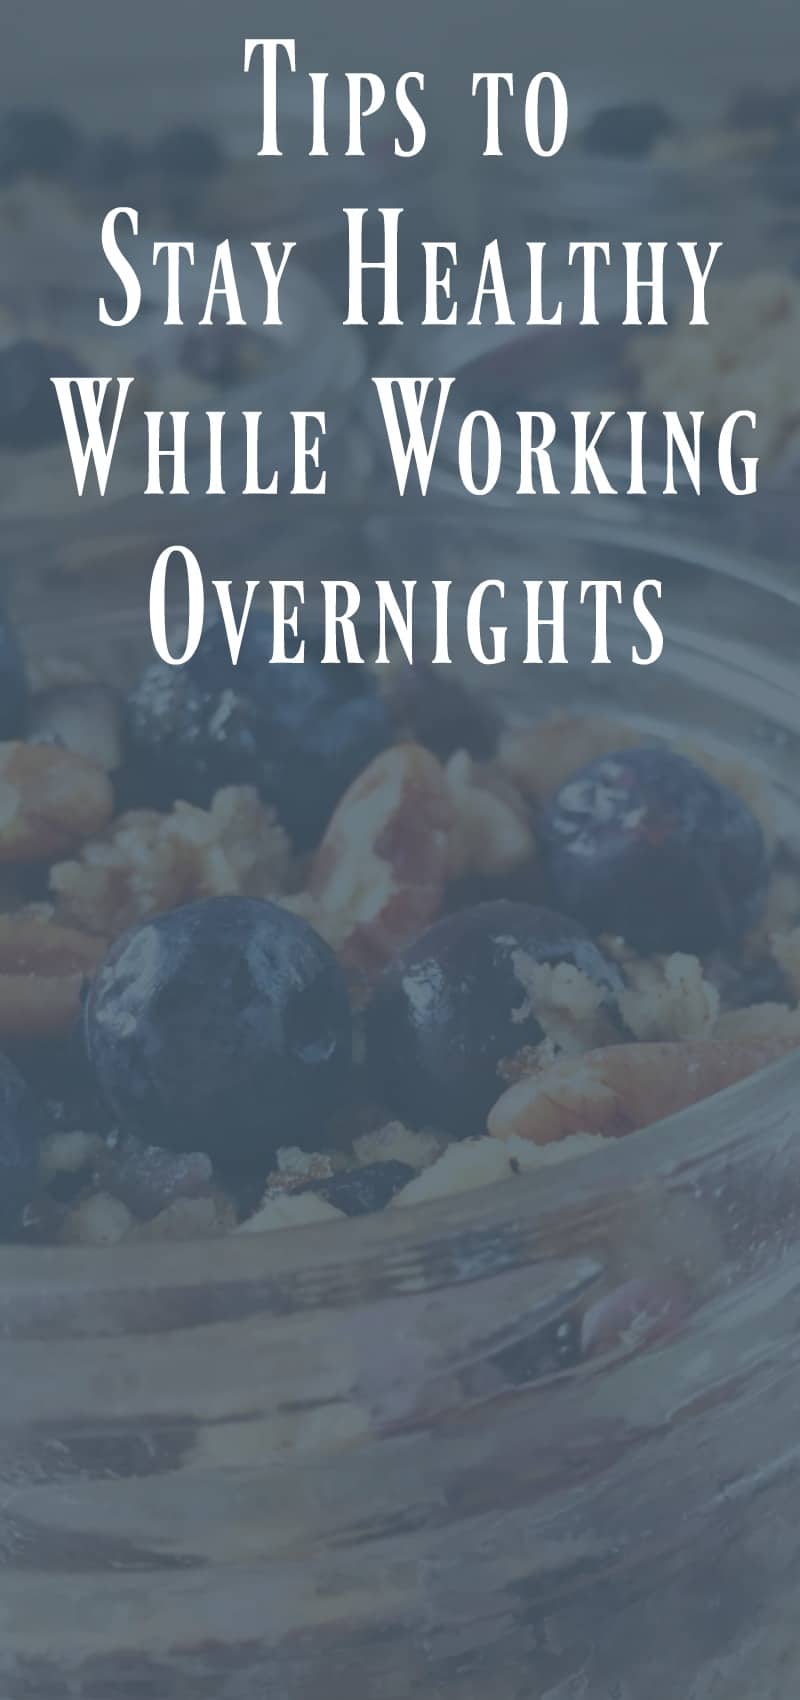 Tips to eat healthy working overnights.